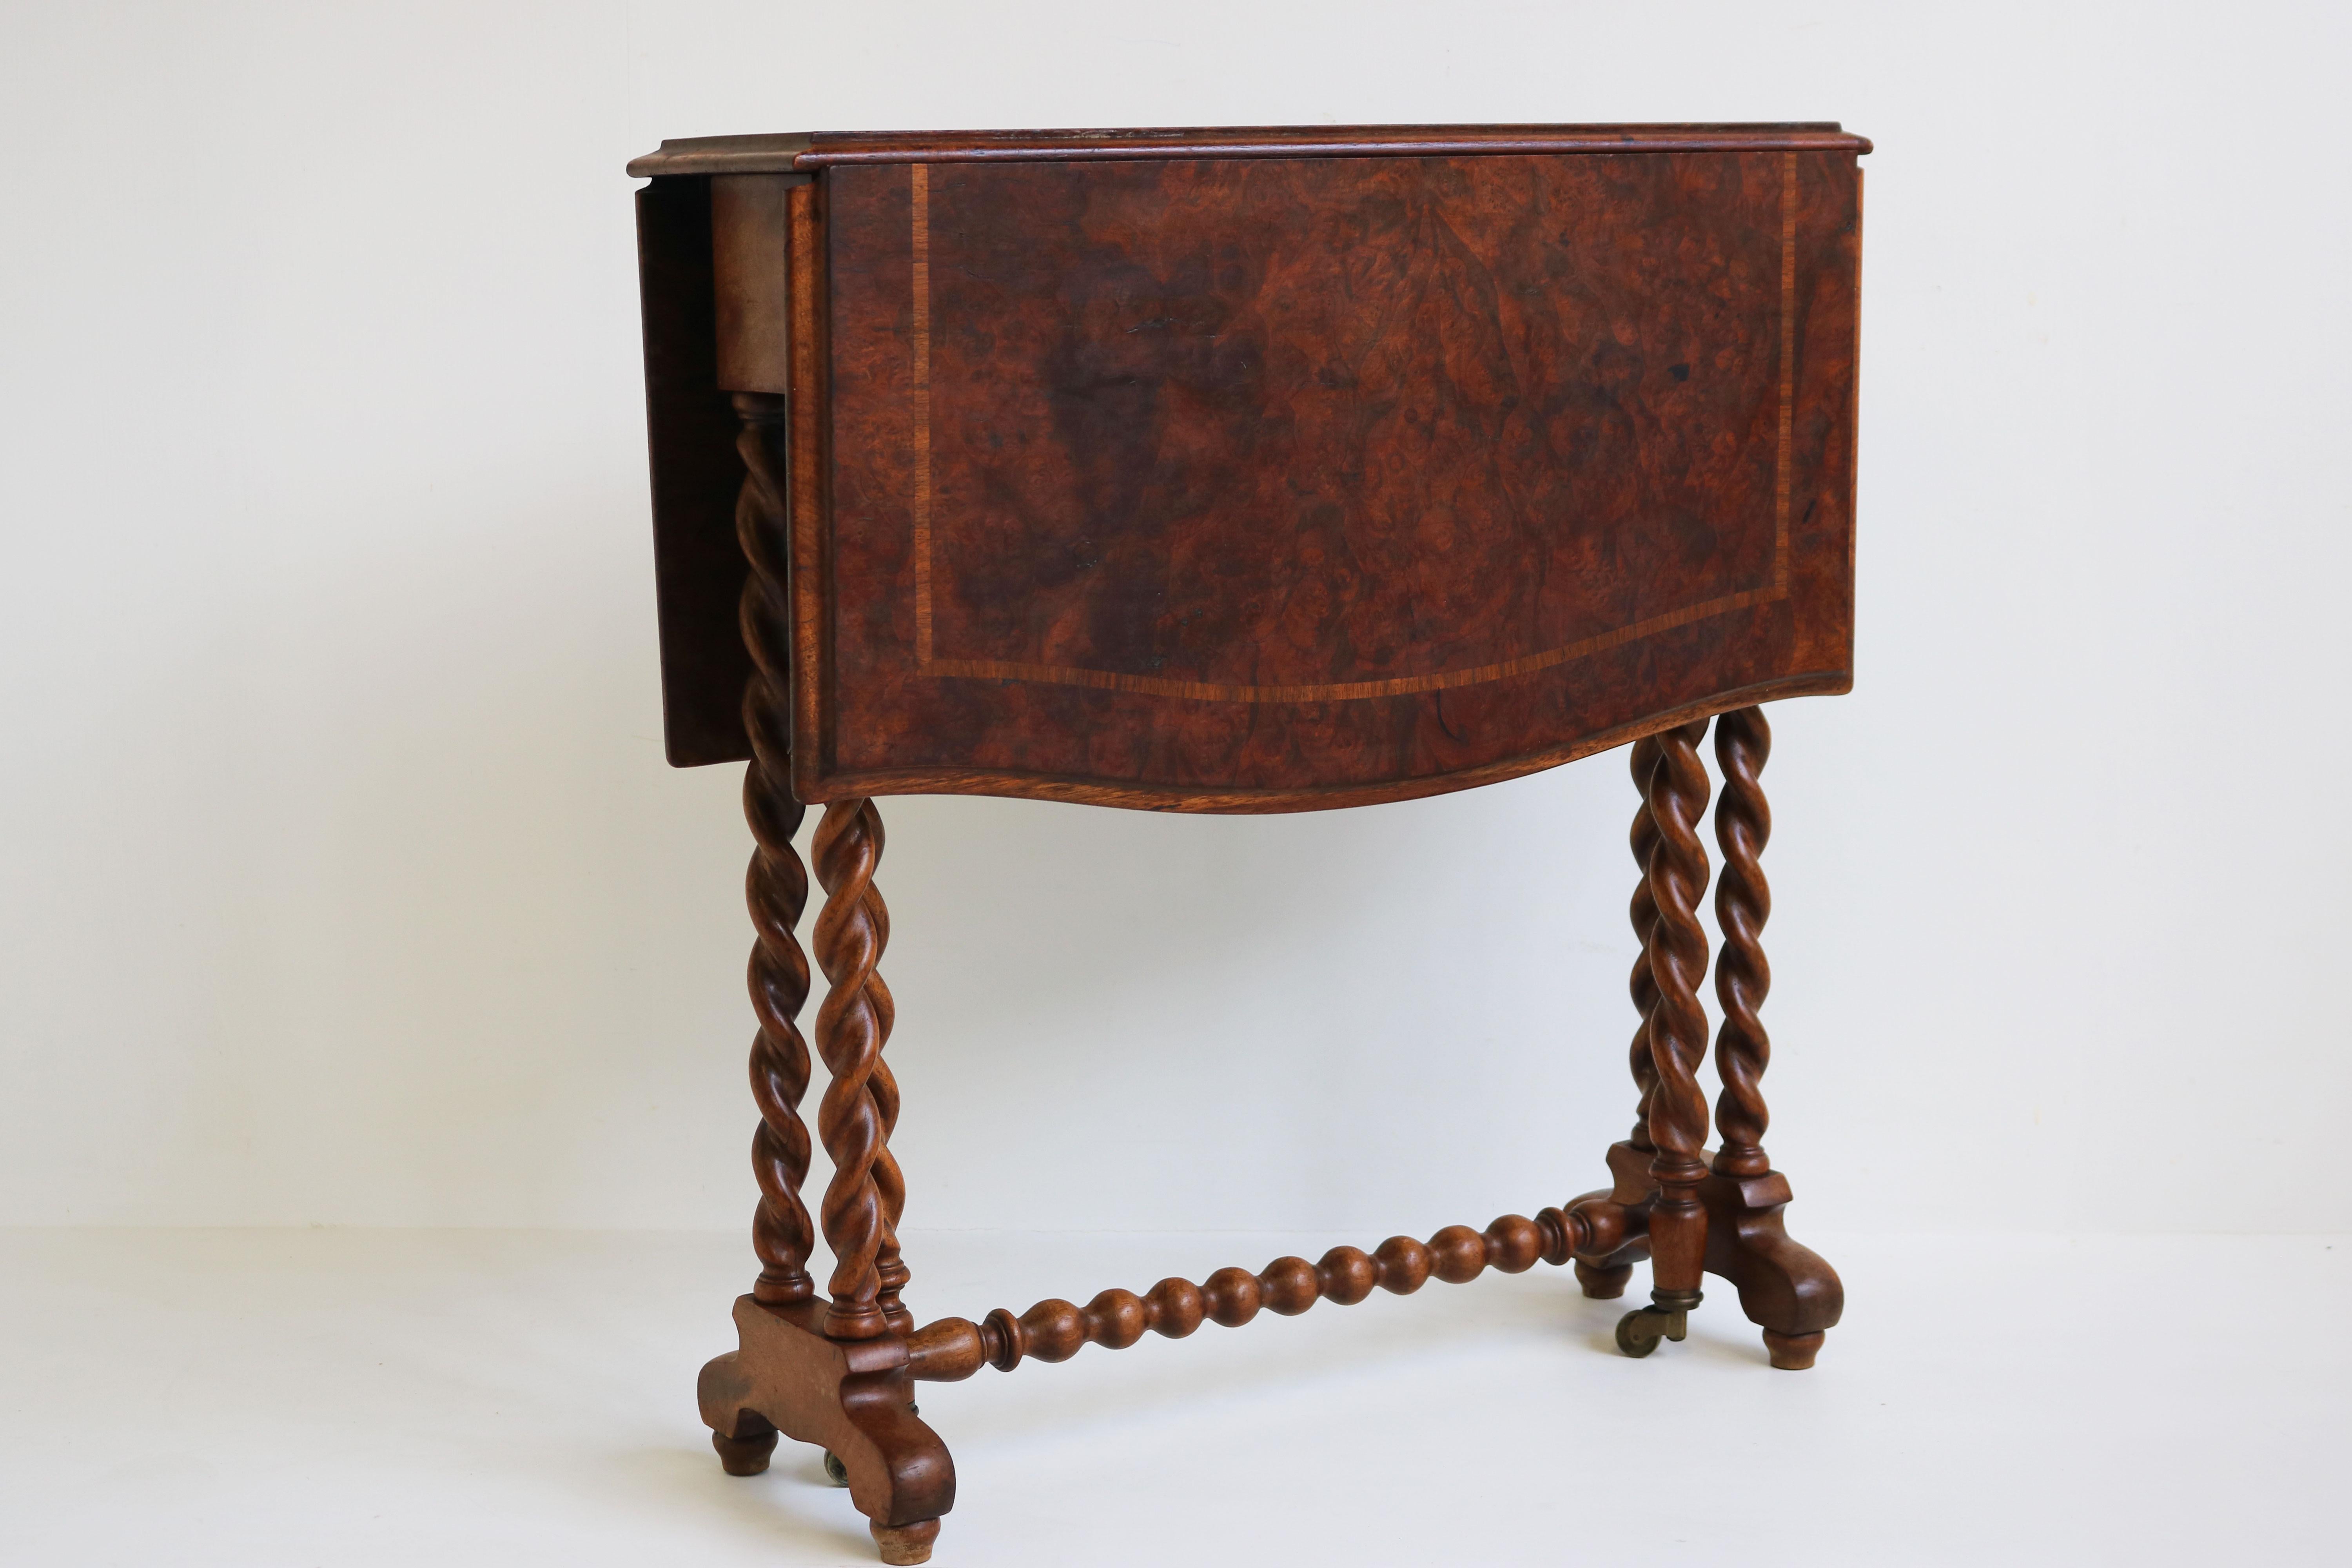 Gorgeous English 19th century barley twist gateleg / foldable table with inlaid top.
 Very nice walnut burl top with inlaid trim. Folds smoothly with its brass wheels.
Amazing quality all solid wood & gorgeous original condition.
Very practical &